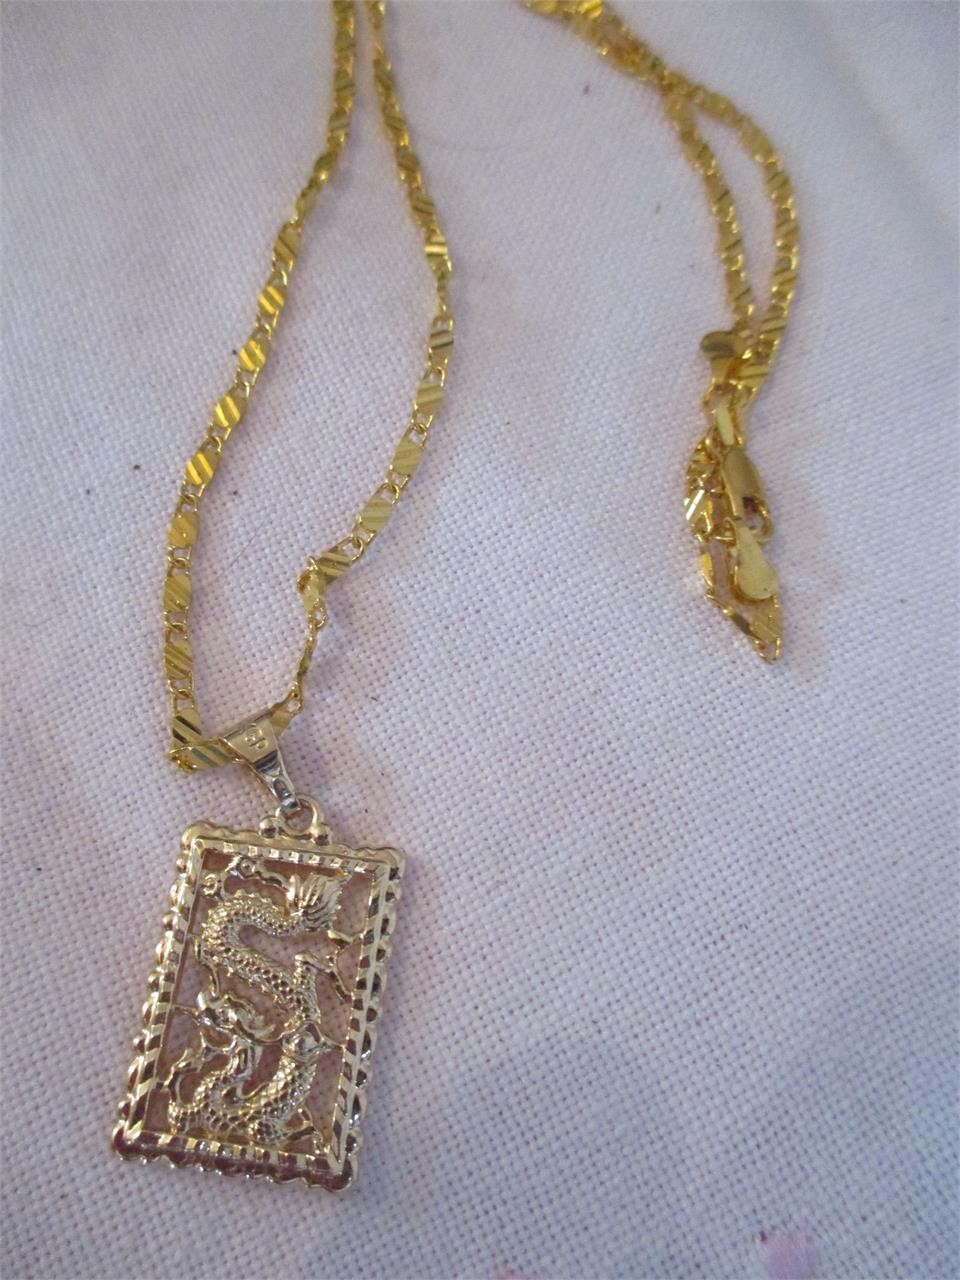 LOT 76 IMPORTED PENDANT AND CHAIN